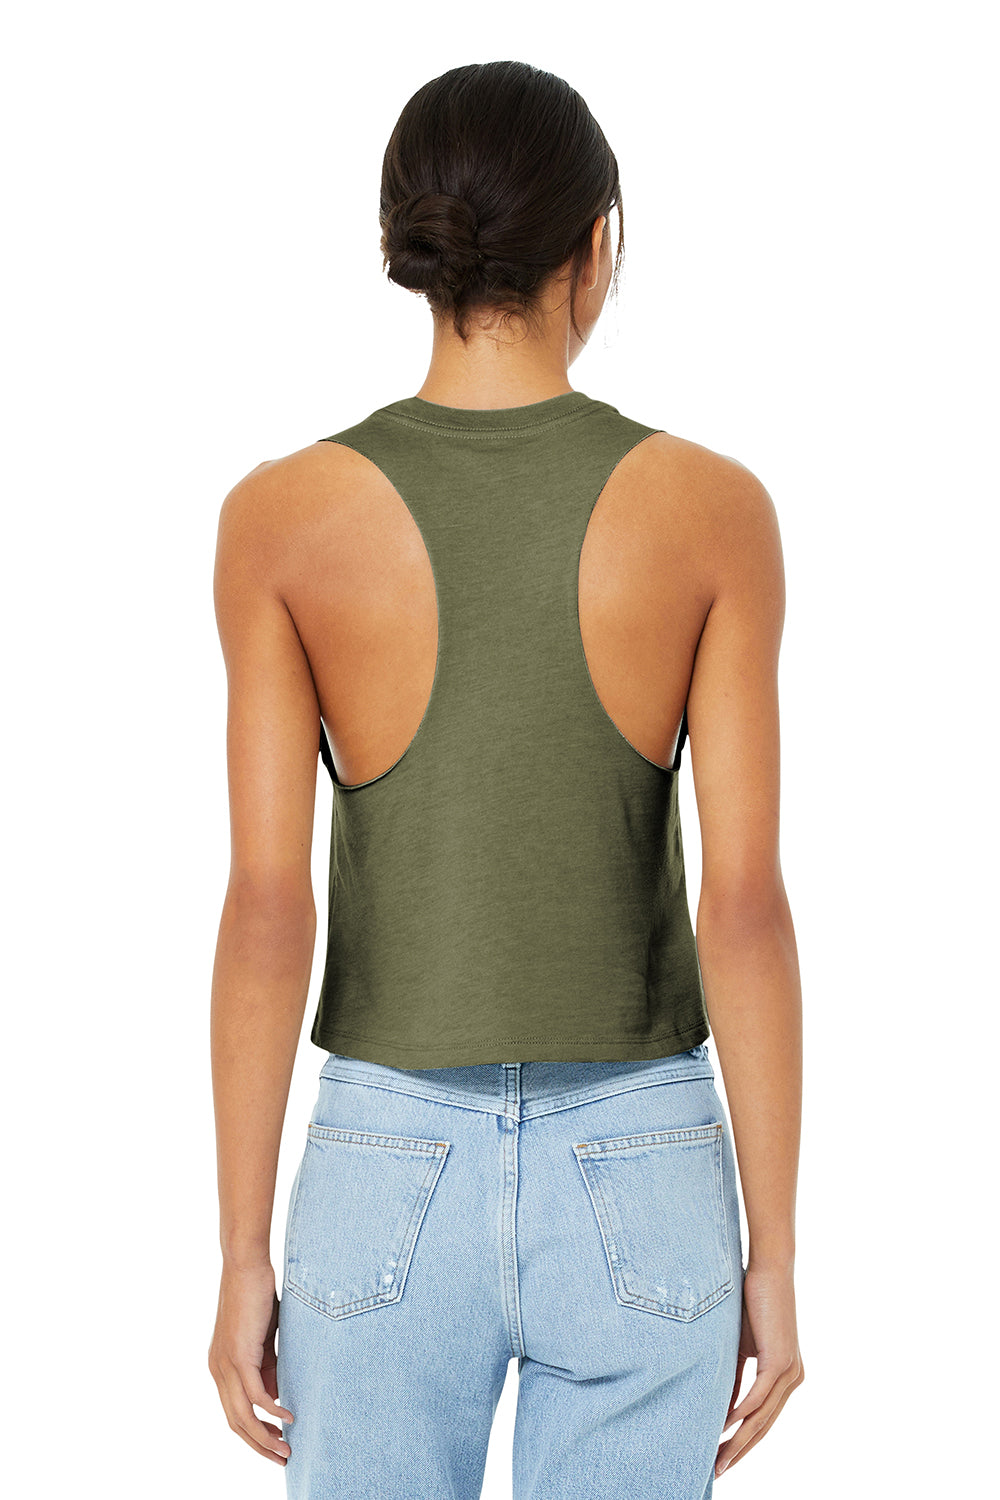 Bella + Canvas BC6682/6682 Womens Cropped Tank Top Heather Olive Green Model Back